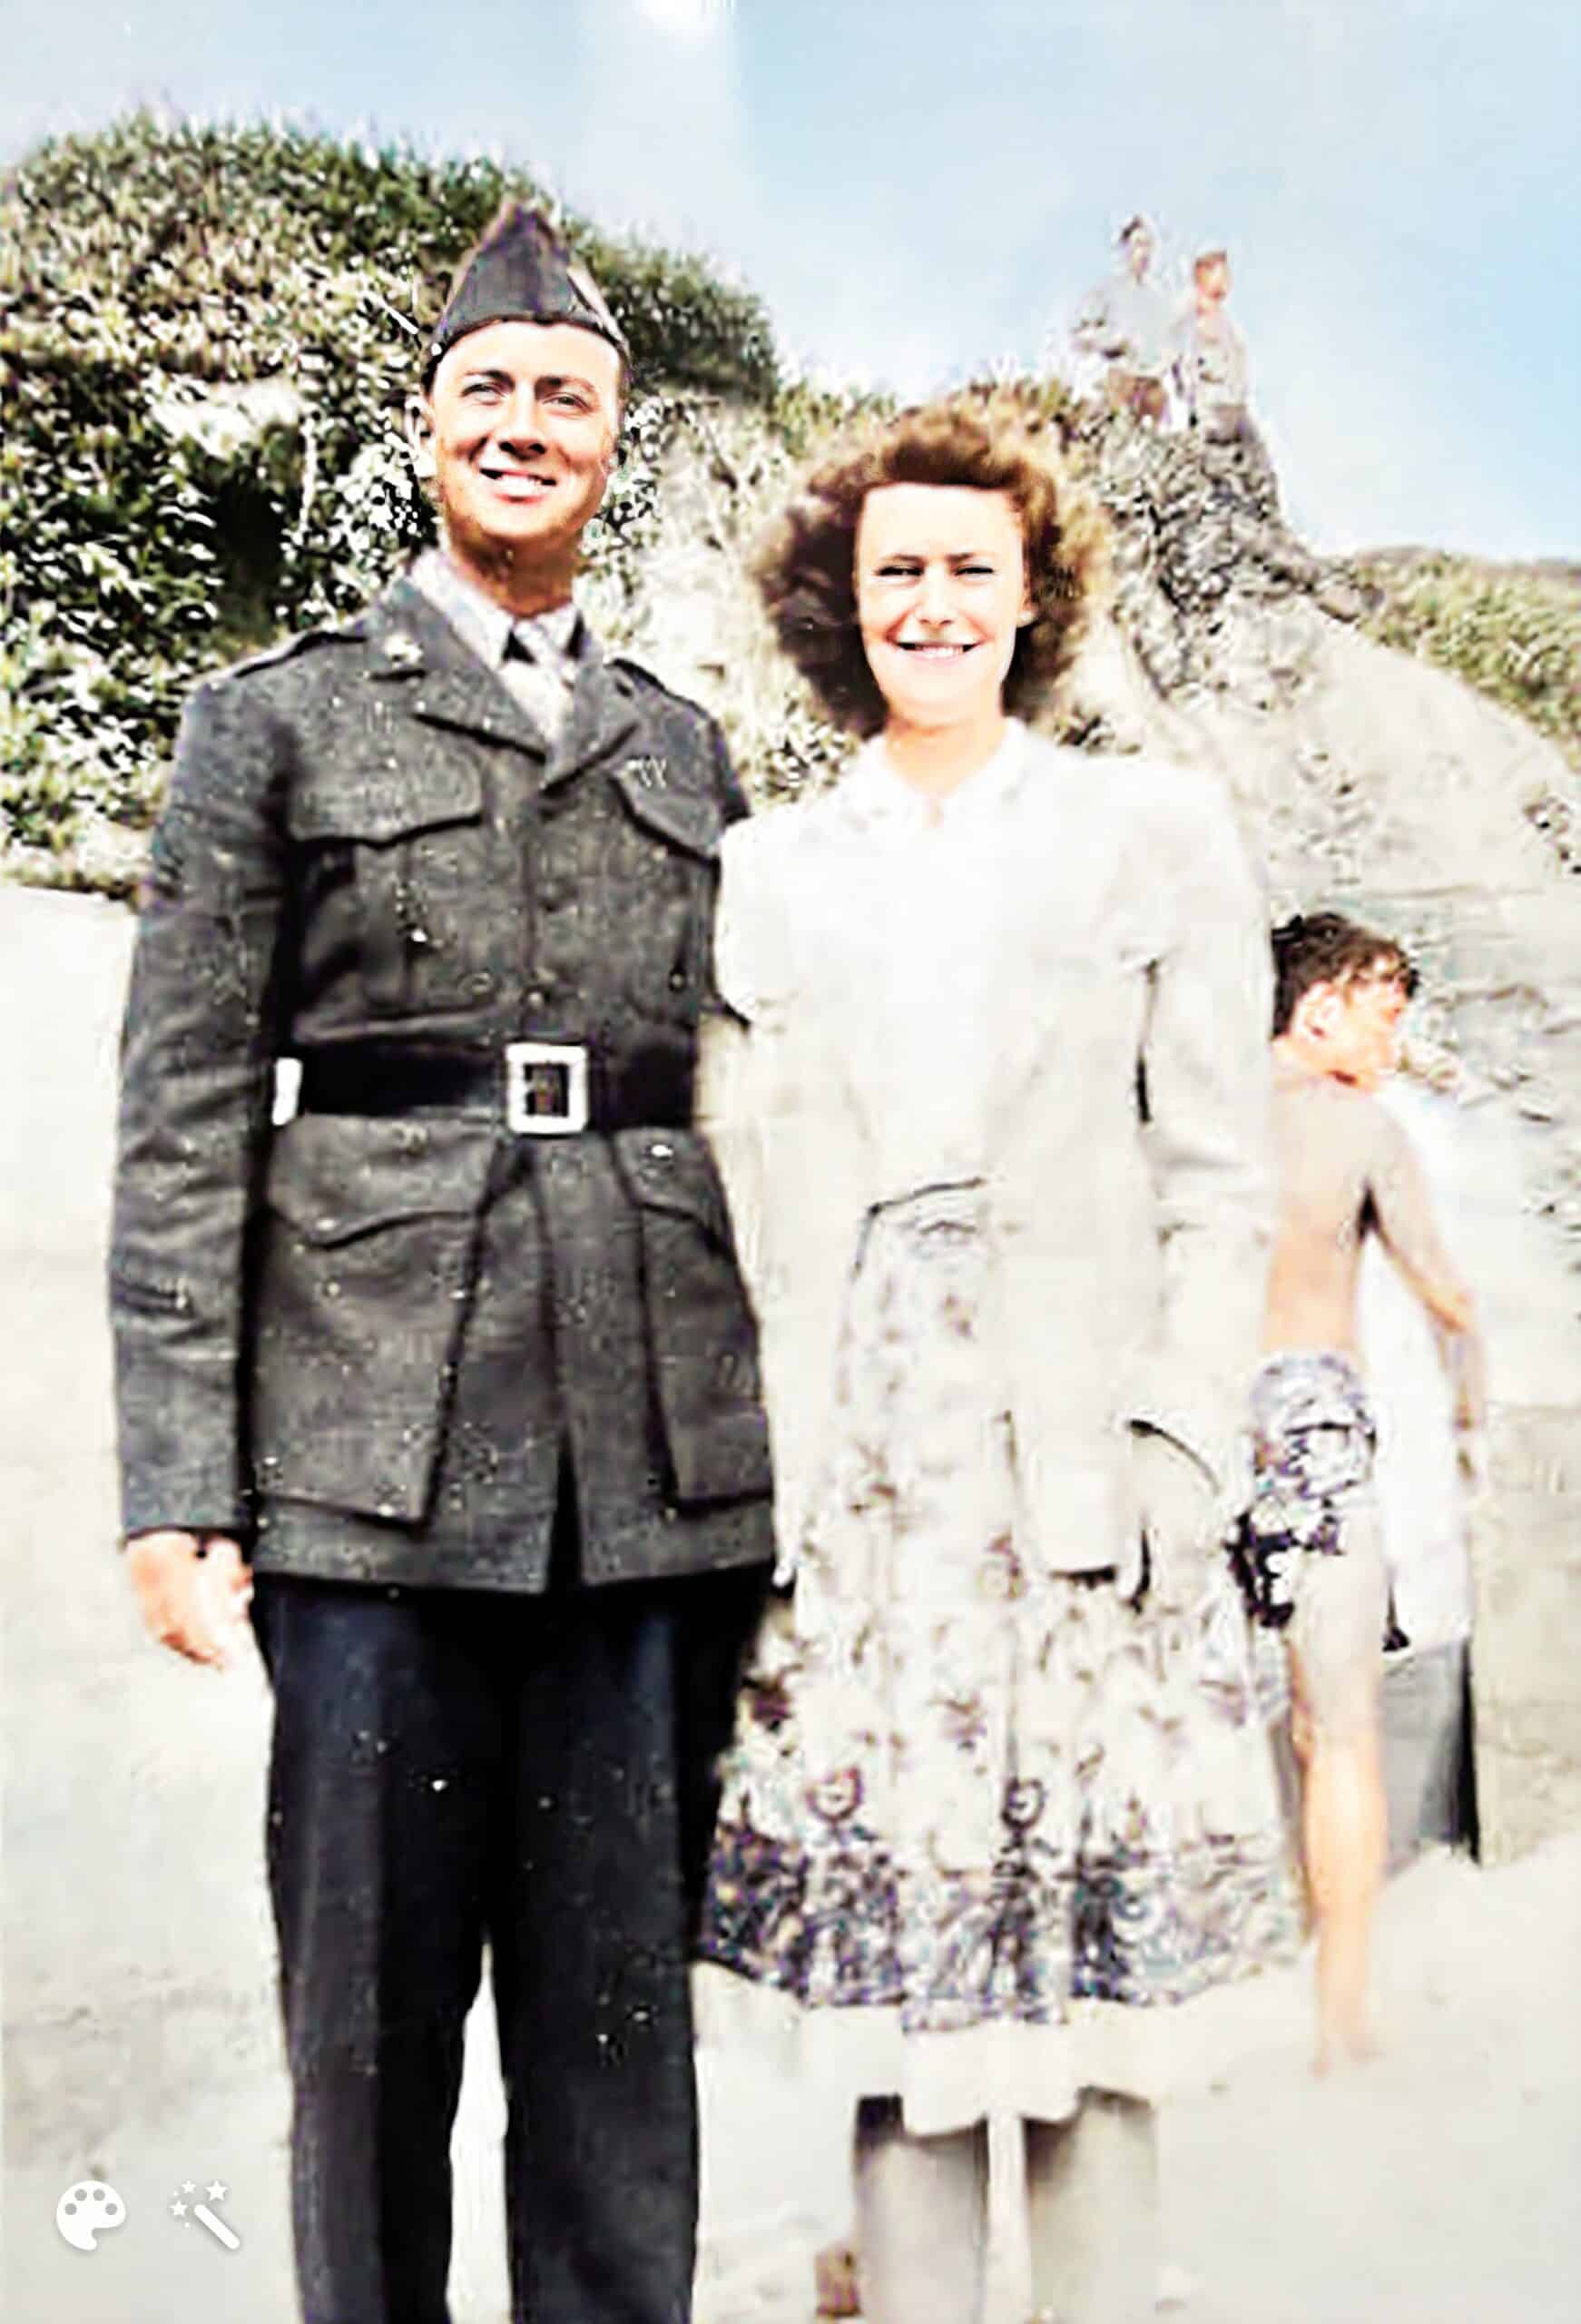 Claude and Marie. Photo colorized and enhanced by MyHeritage